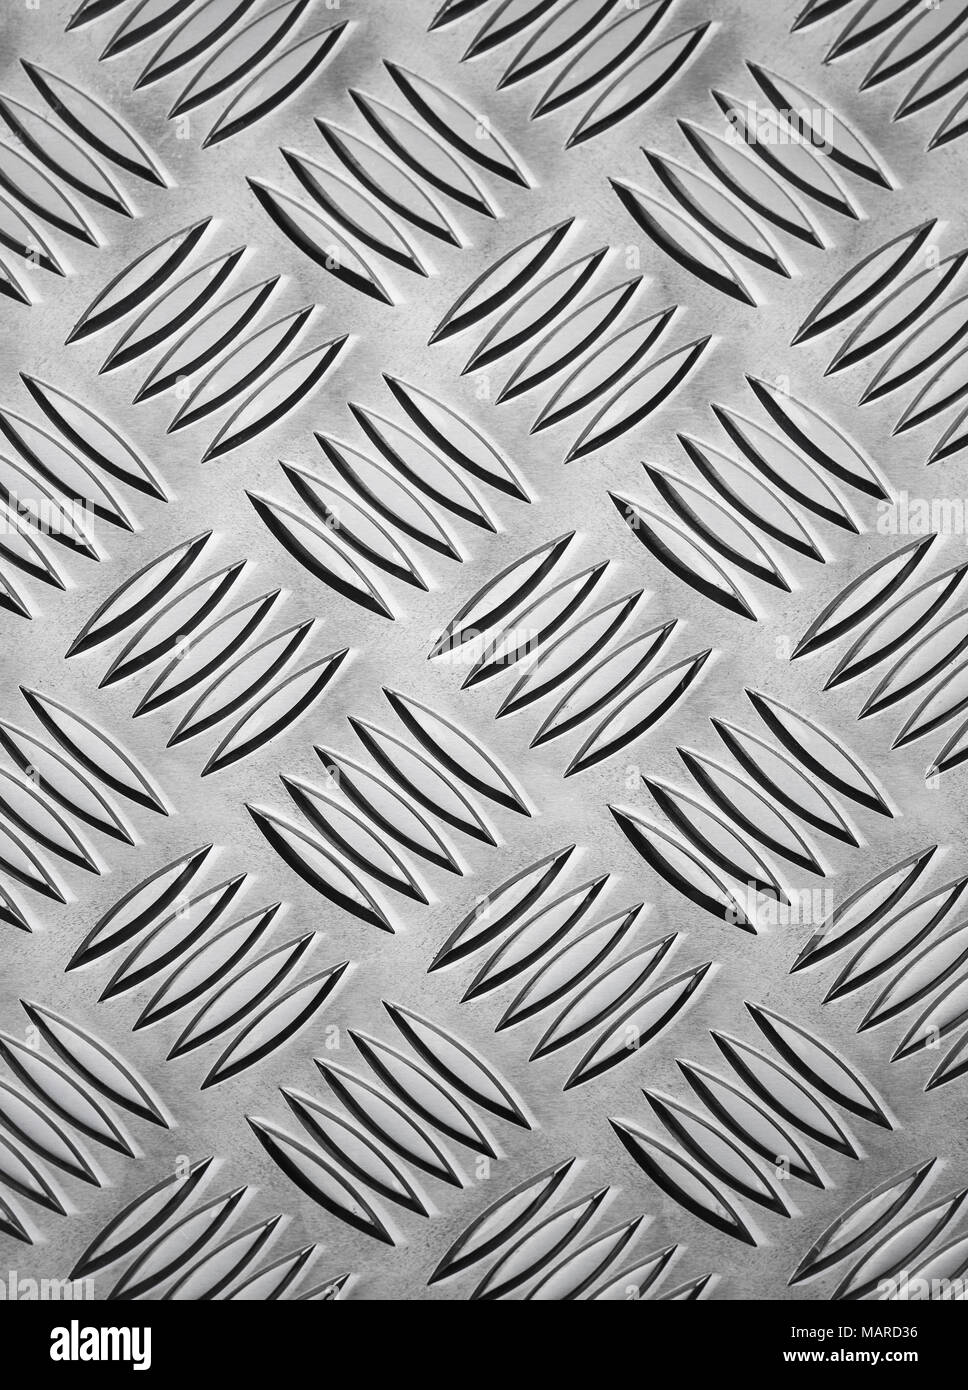 Abstract pattern made from Industrial non slip embossed metal. Stock Photo